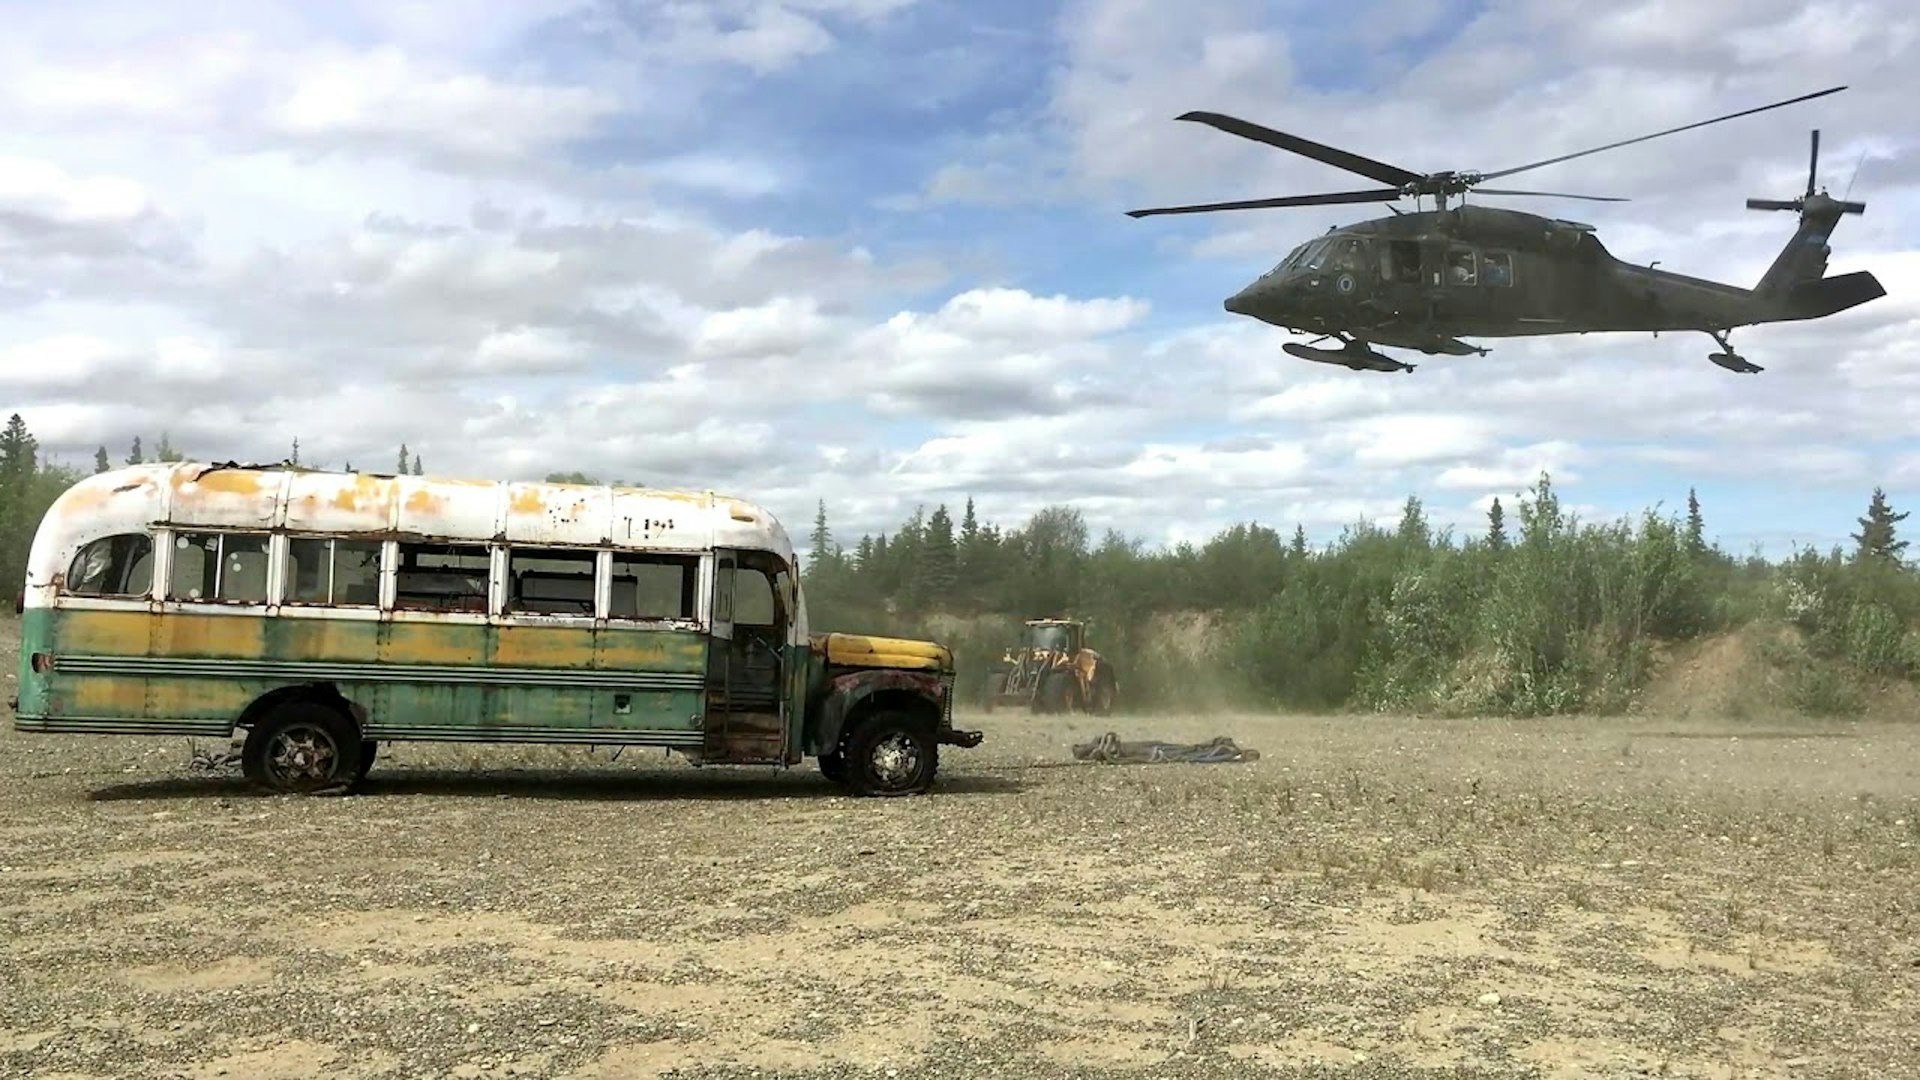 A helicopter poised to take the Into the Wild Bus away